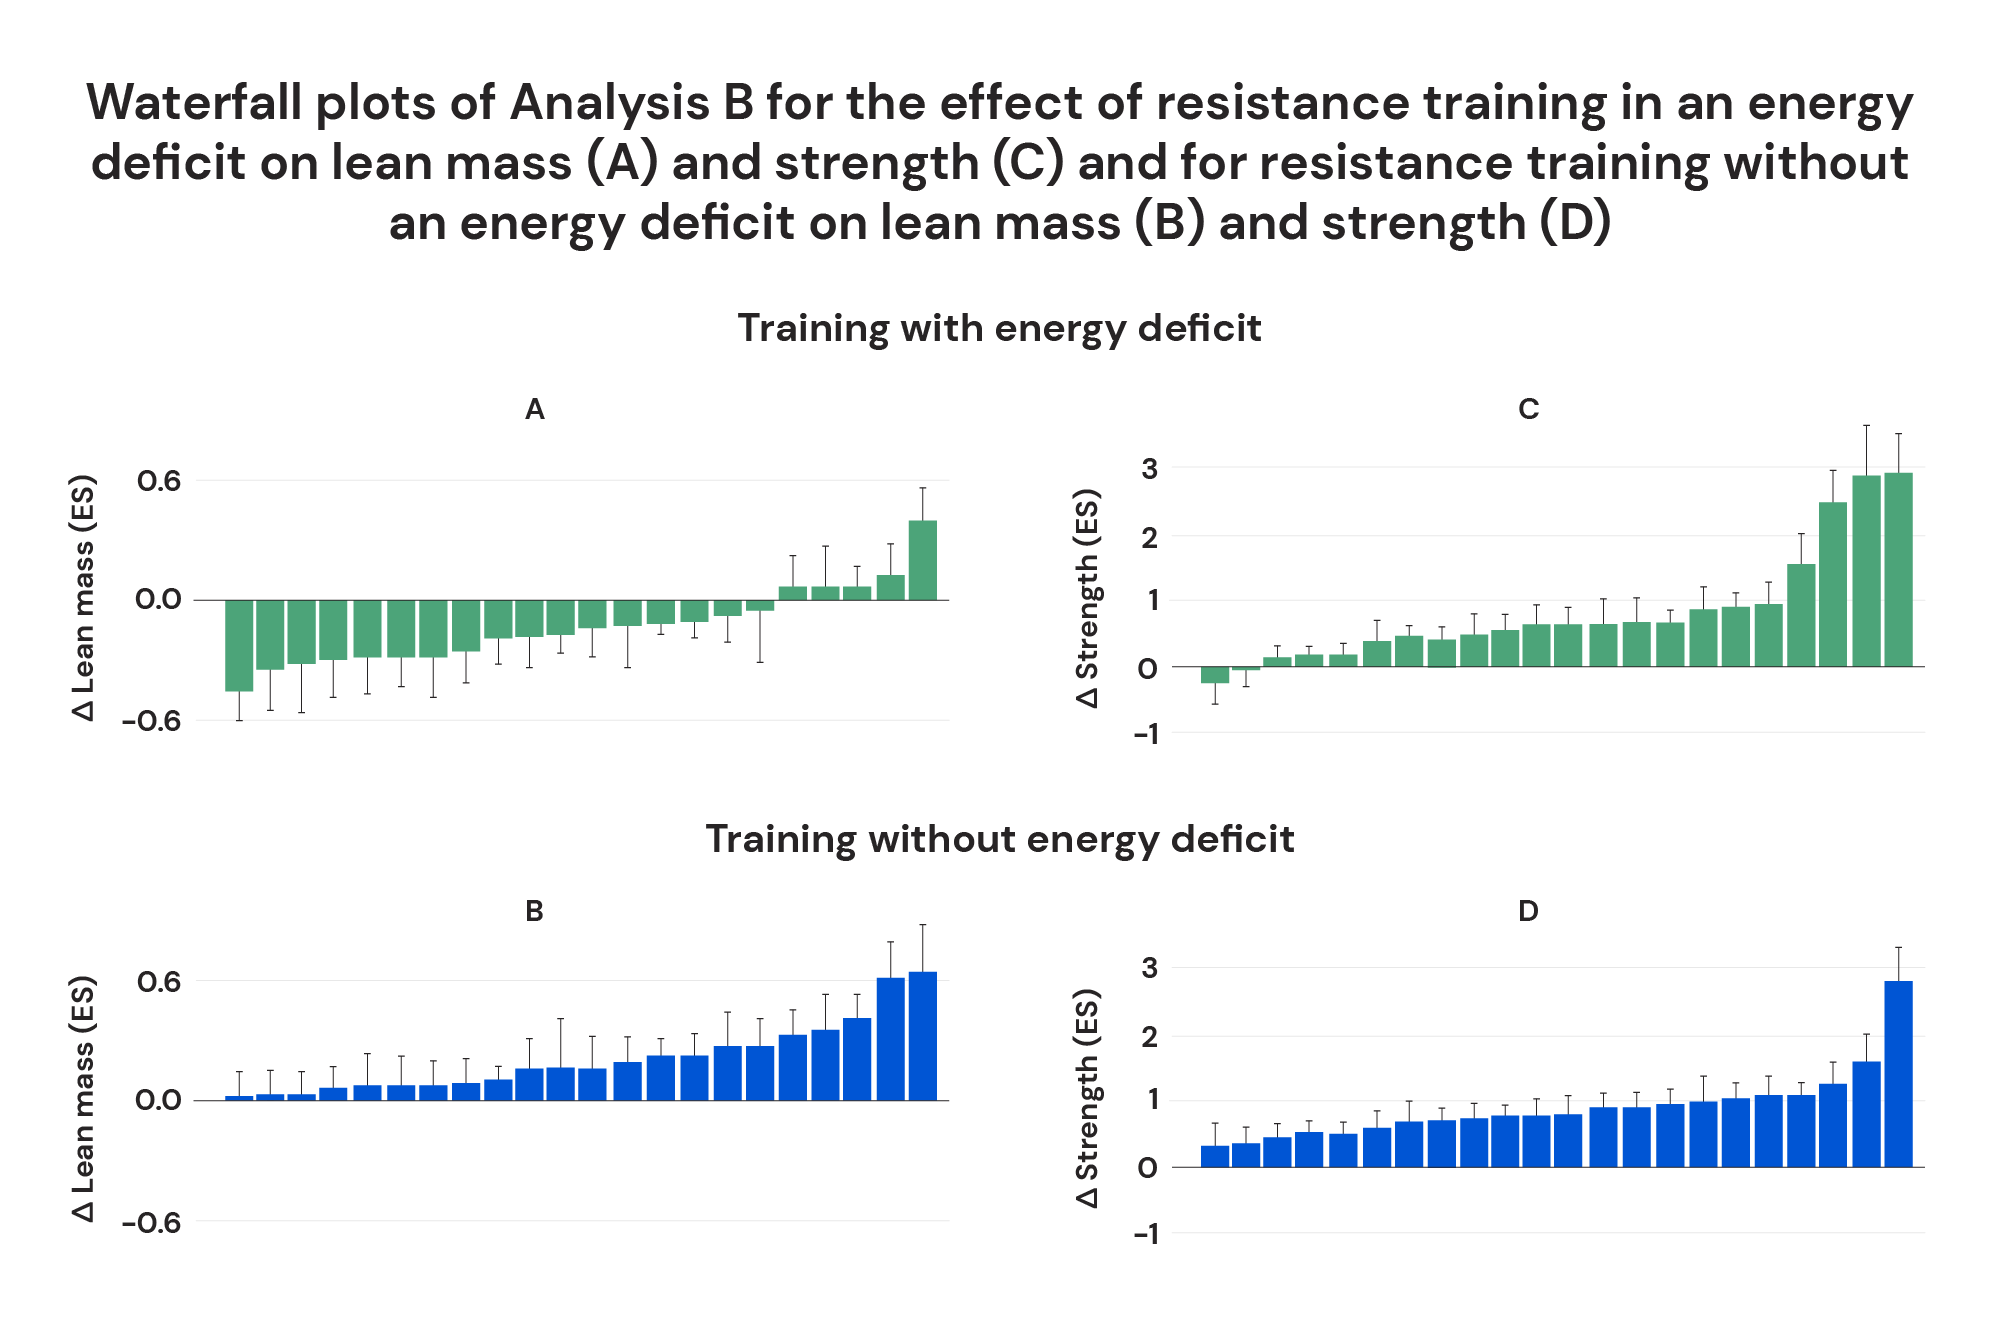 Waterfall phots of Analysis B for the effect of resistance training in an energy deficit on lean mass and strength and for resistance training without an energy deficit on lean mass and strength